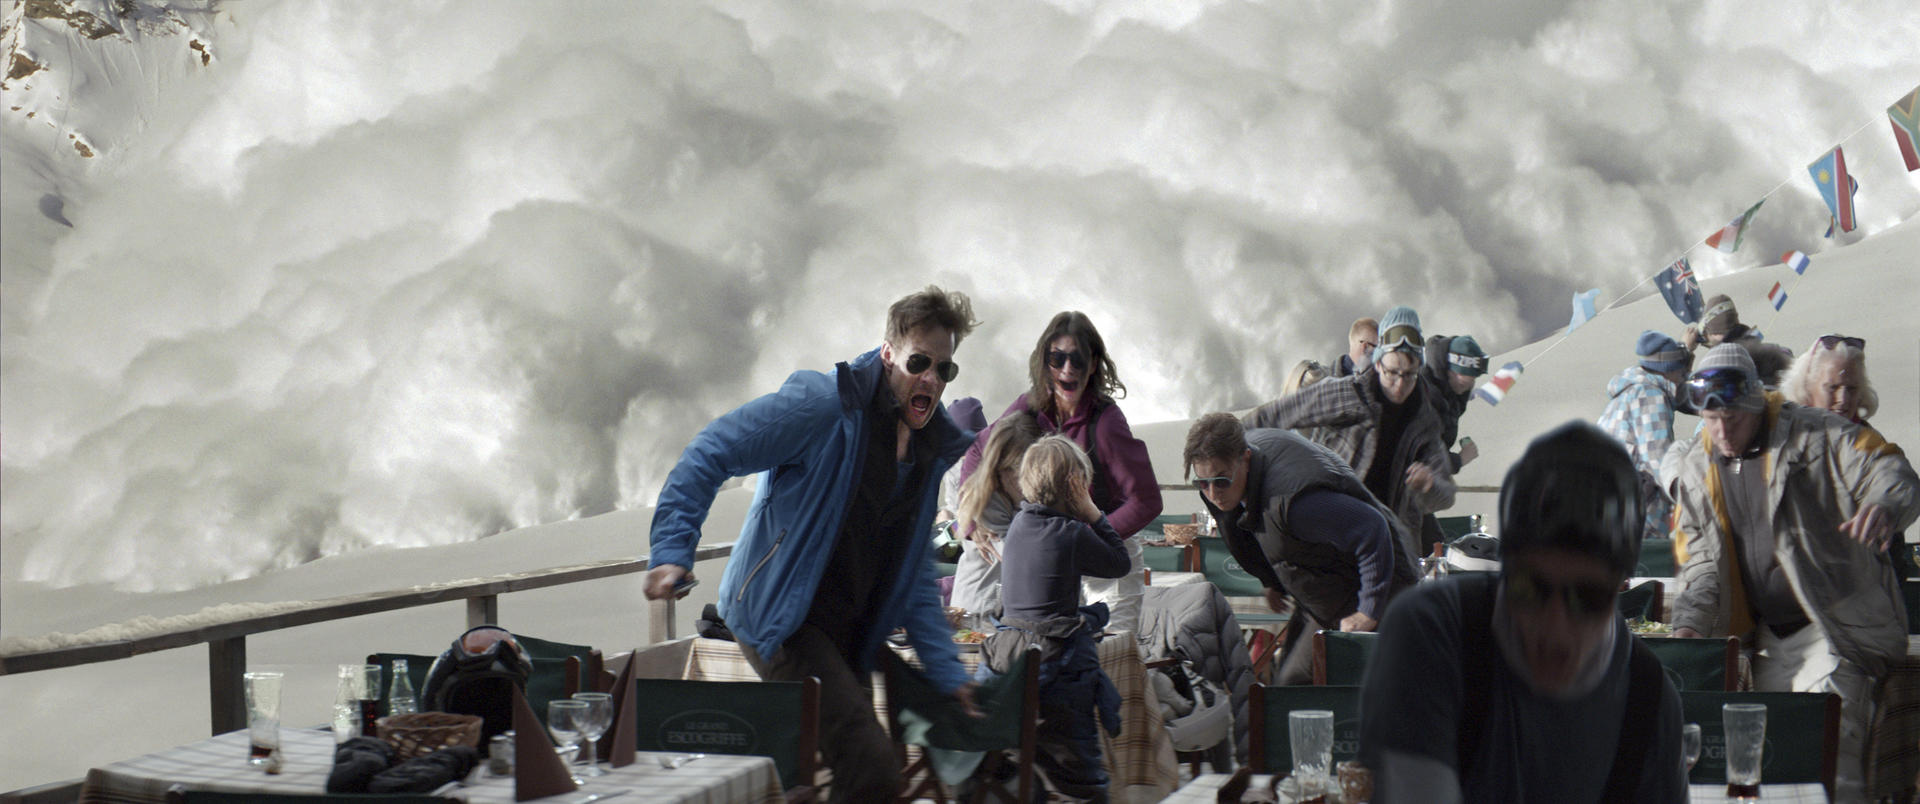 Tomas abandons his family in Force Majeure.